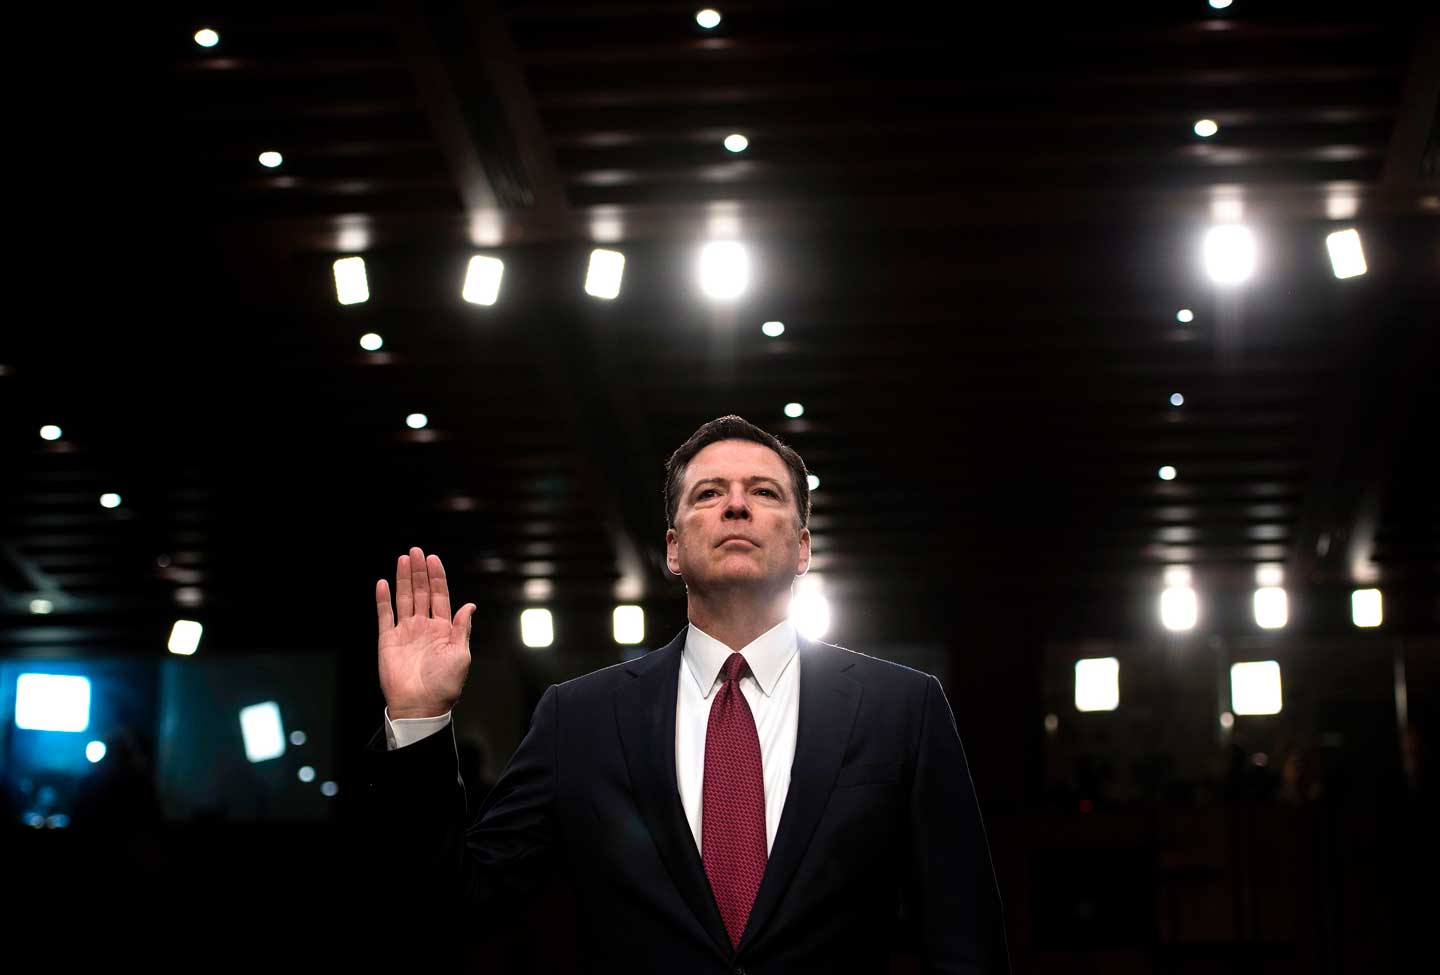 Ousted FBI director James Comey is sworn in during a hearing before the Senate Select Committee on Intelligence on Capitol Hill June 8, 2017 in Washington, DC. Fired FBI director James Comey took the stand Thursday in a crucial Senate hearing, repeating explosive allegations that President Donald Trump badgered him over the highly sensitive investigation Russia's meddling in the 2016 election. (Brendan Smialowski/AFP/Getty Images)